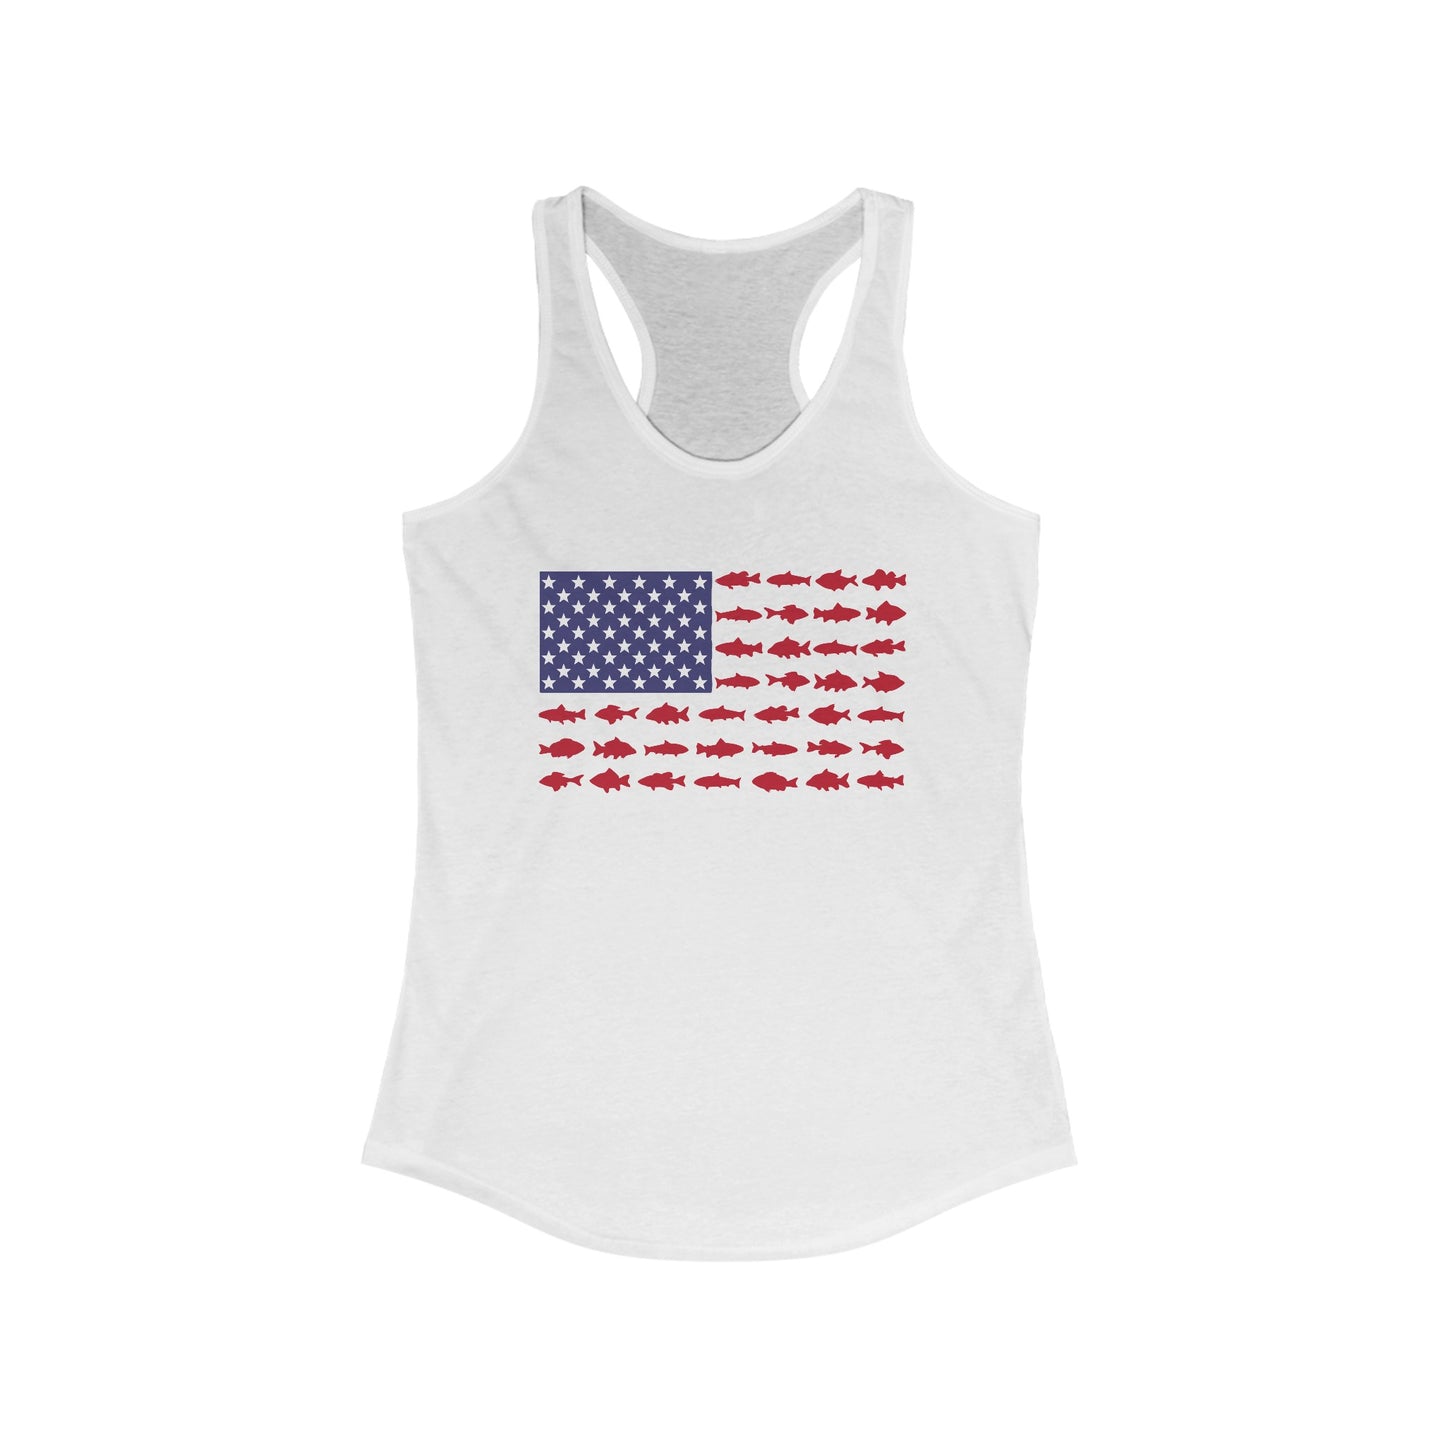 American Flag with Fish Stipes Women's Ideal Racerback Tank